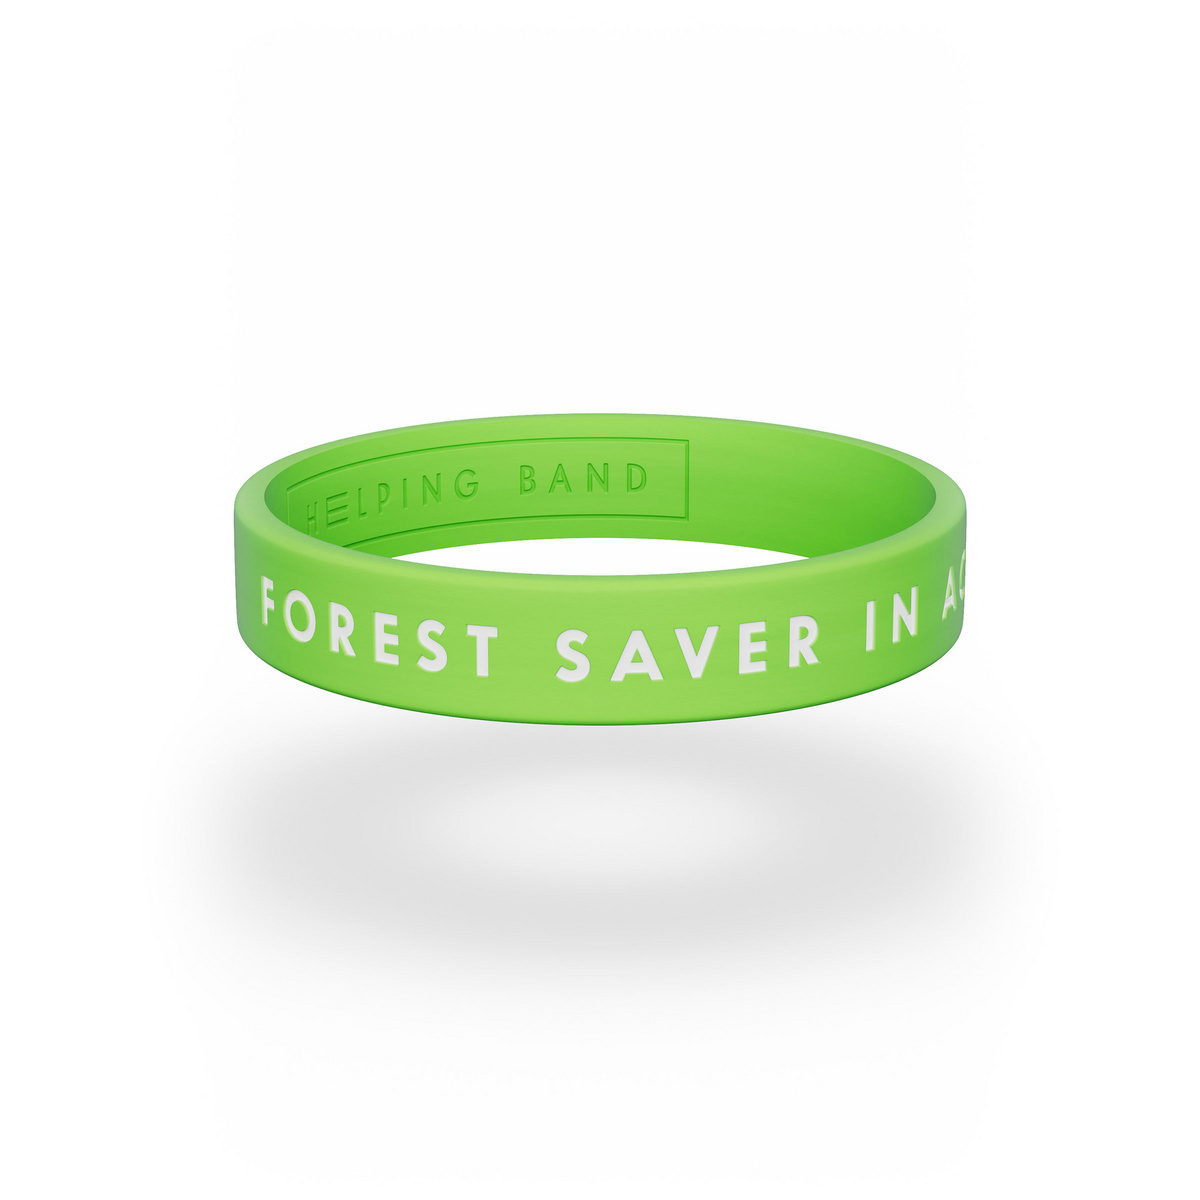 Image of Helping Band Bracciale Forest Saver in Action